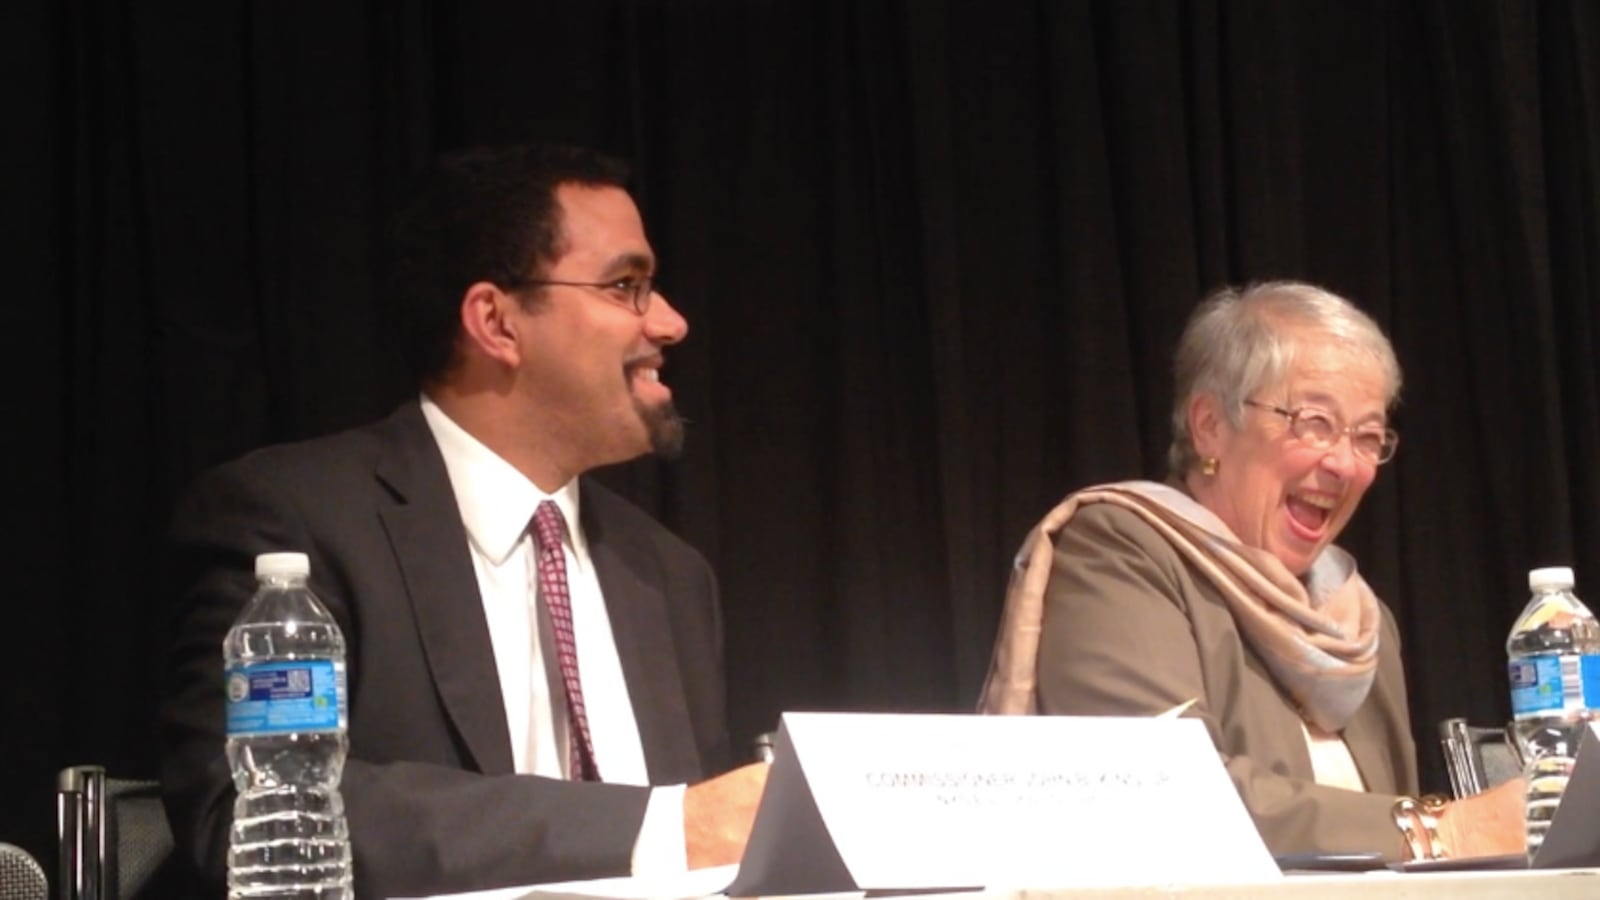 State Education Commissioner John King and Chancellor Carmen Fariña sign an agreement on goals to raise outcomes for English language learners.